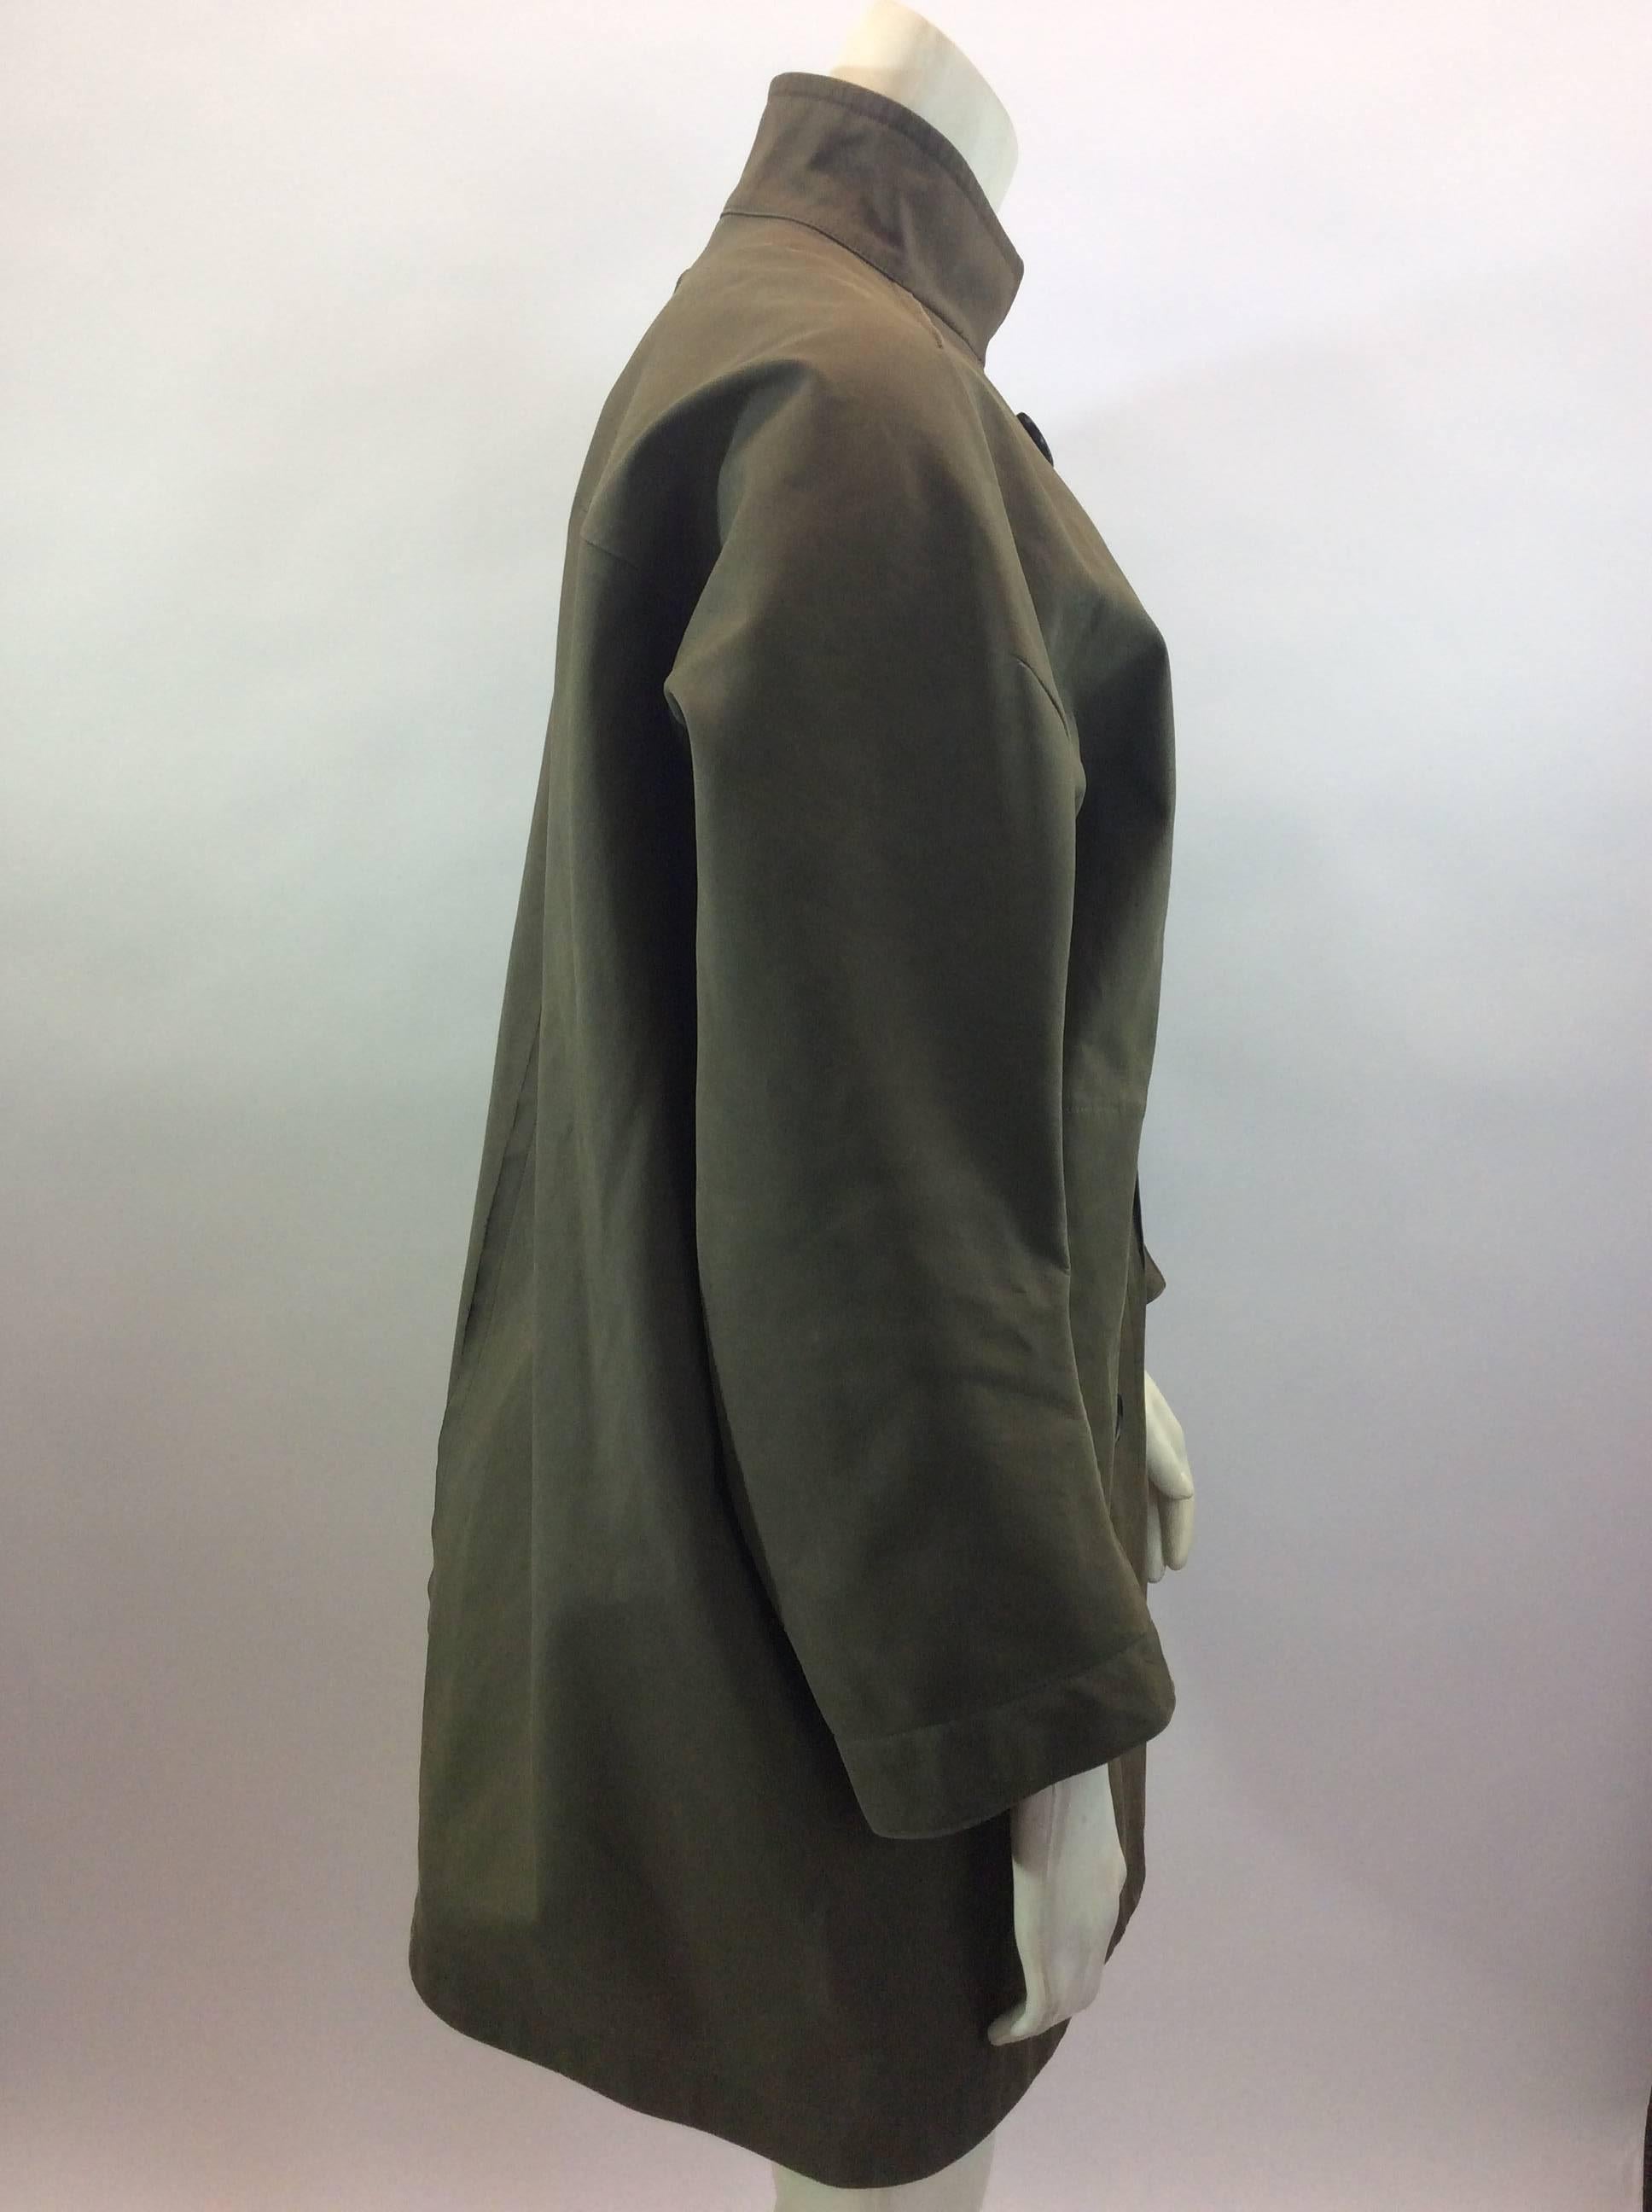 Jil Sander Olive Coat In Excellent Condition For Sale In Narberth, PA